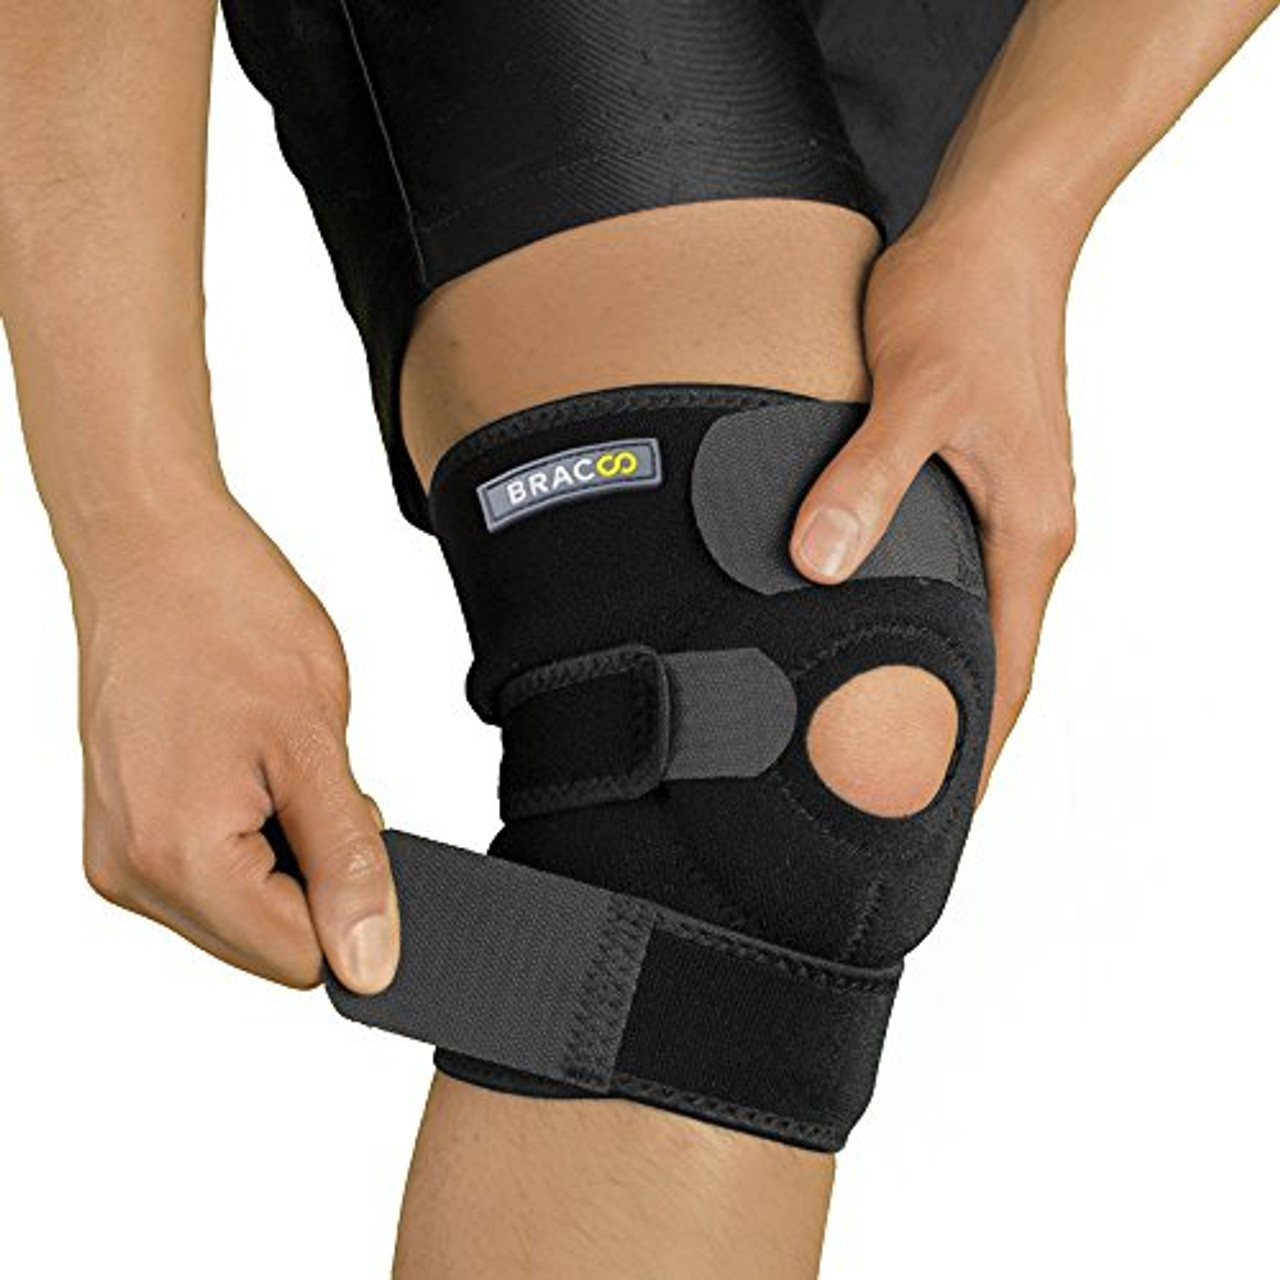 Arbitrage Evalueerbaar roestvrij Bracoo Knee Support, Open-Patella Brace for Arthritis, Joint Pain Relief,  Injury Recovery with Adjustable Strapping